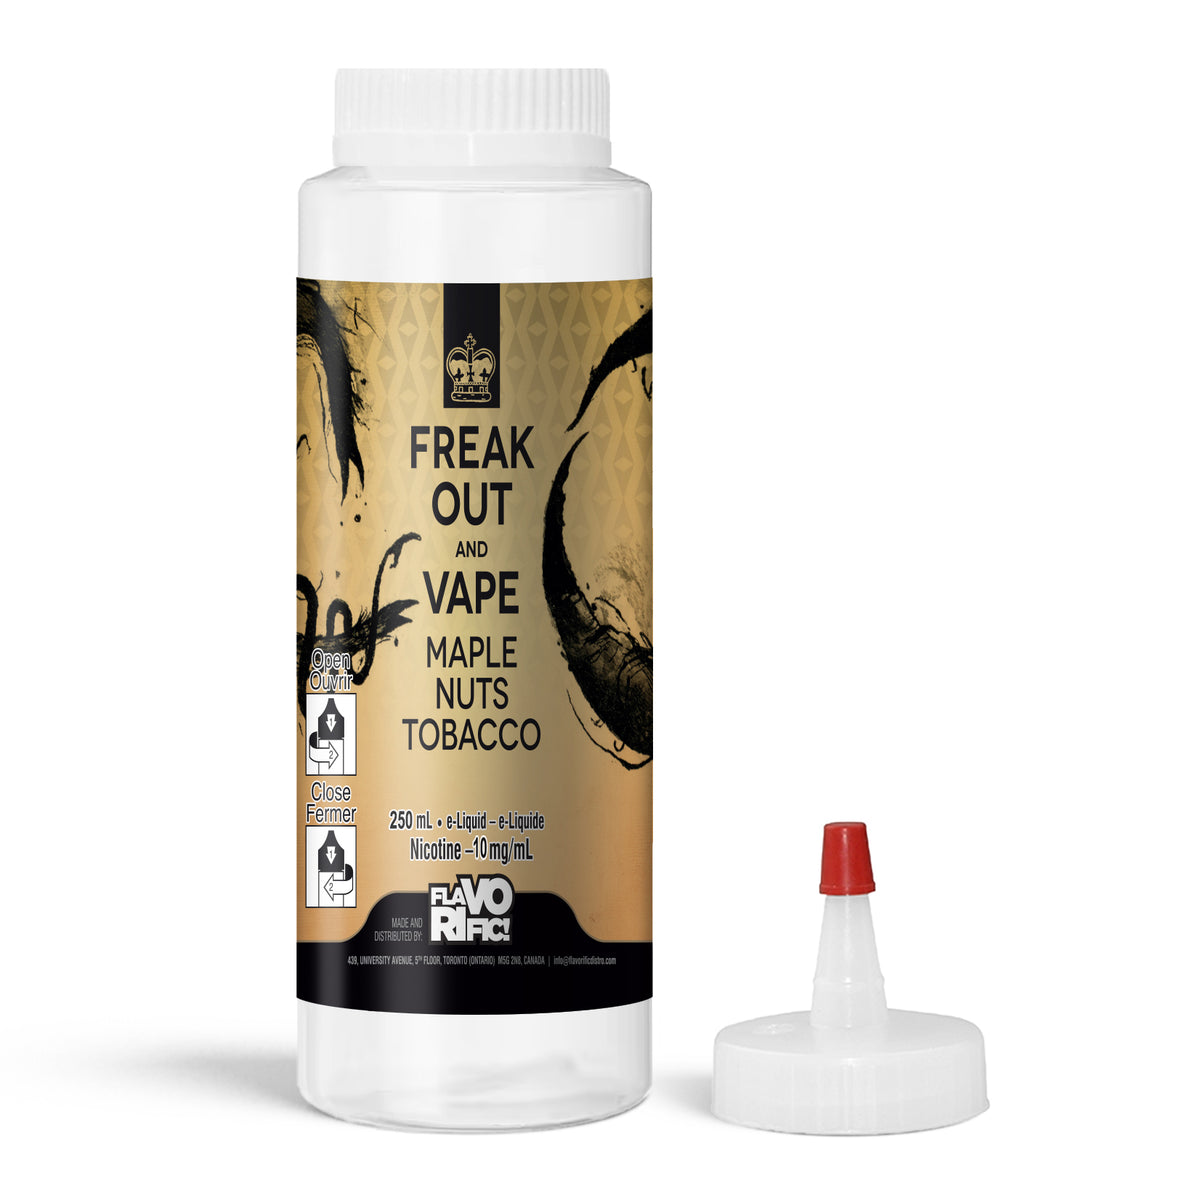 Freak Out And Vape Salt - Maple Nuts Tobacco (250mL) (6872217878583)